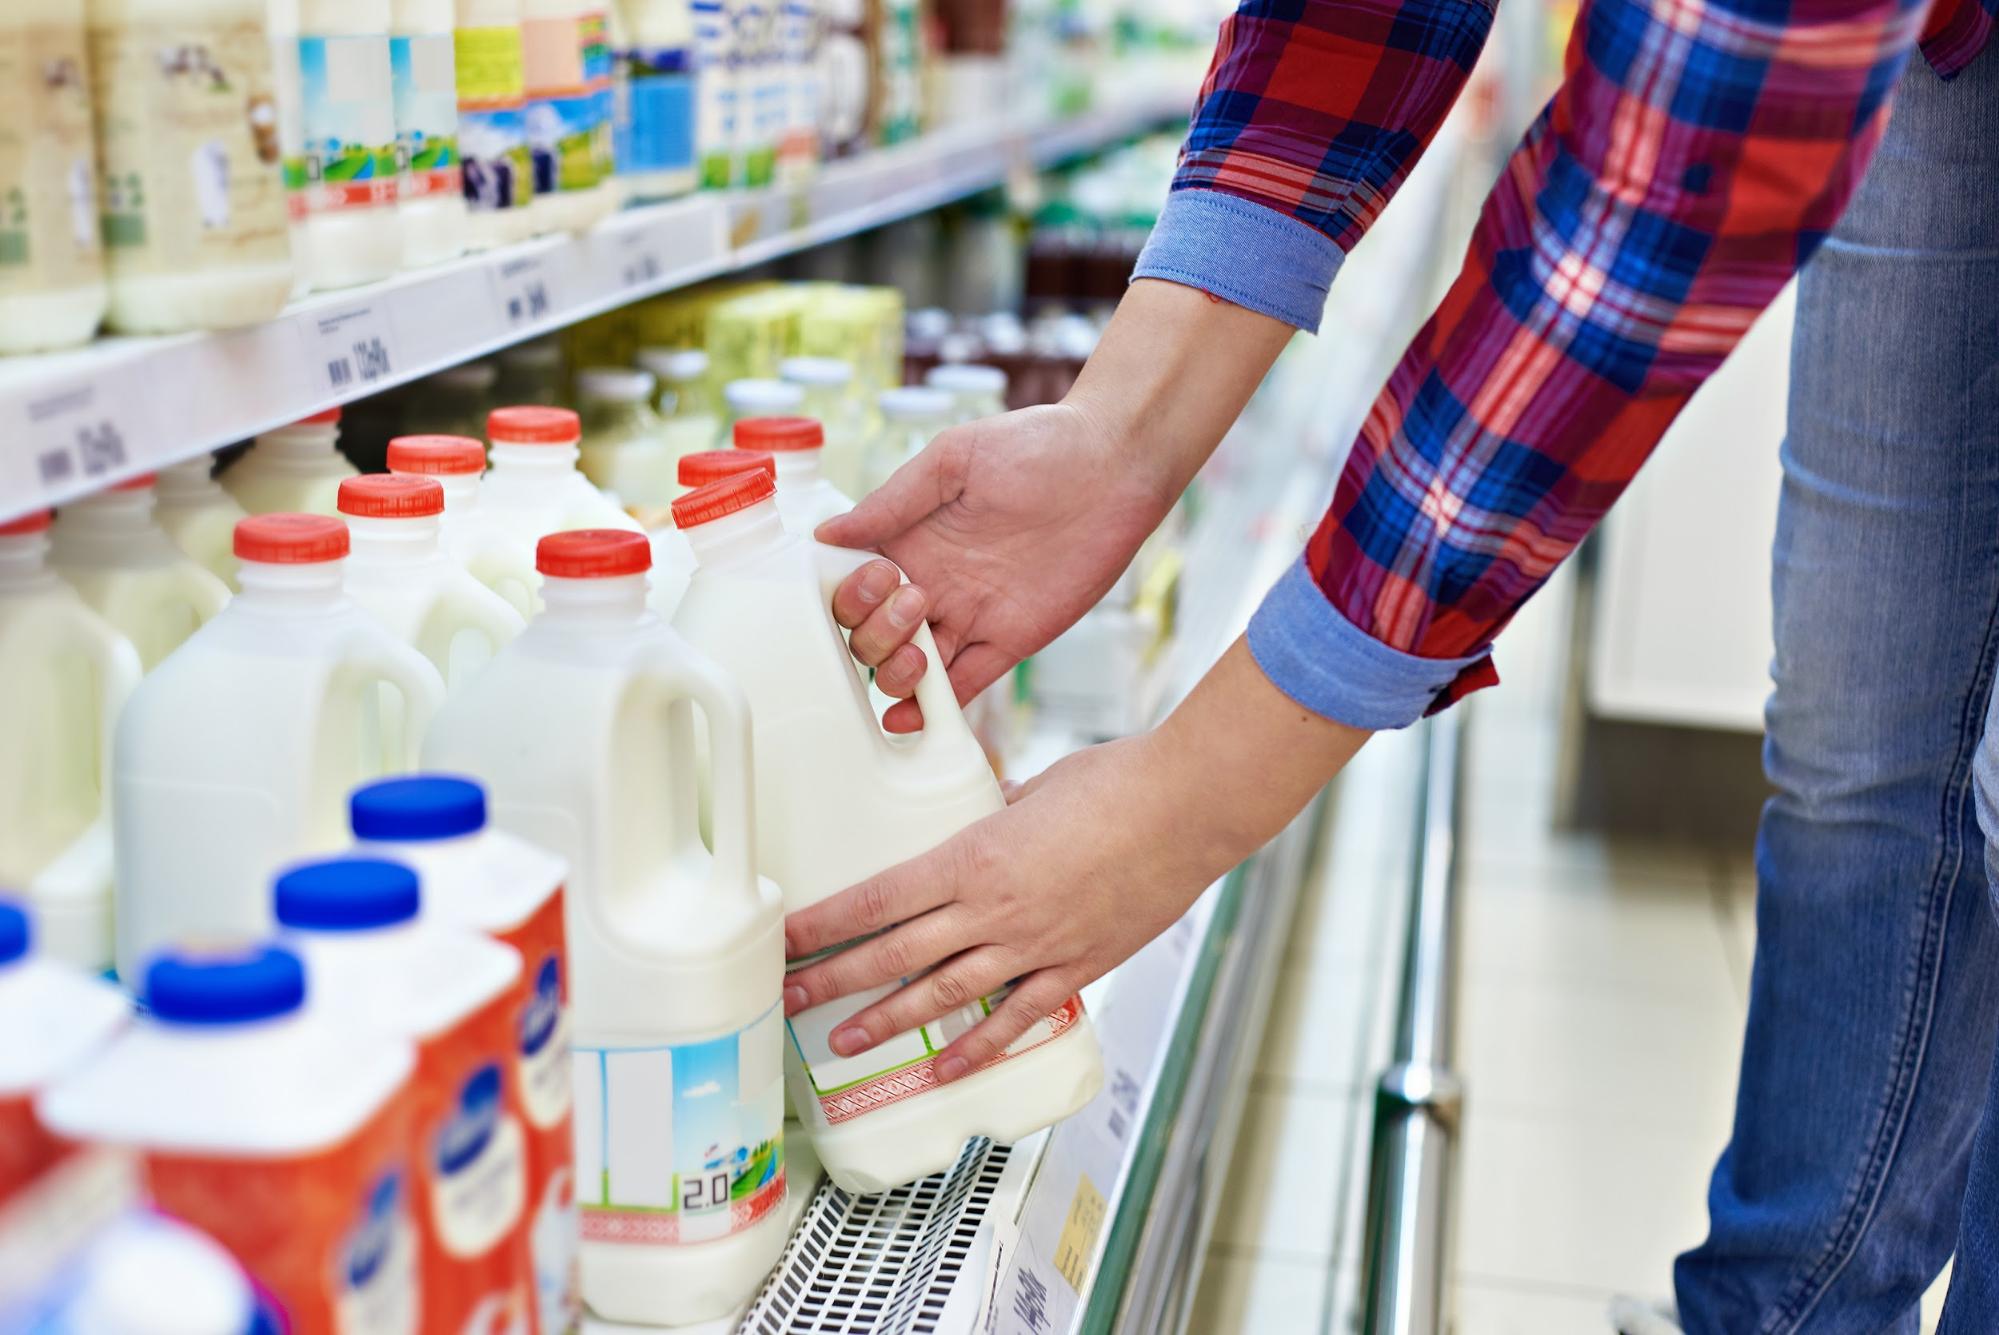 A person buys milk at the grocery store.